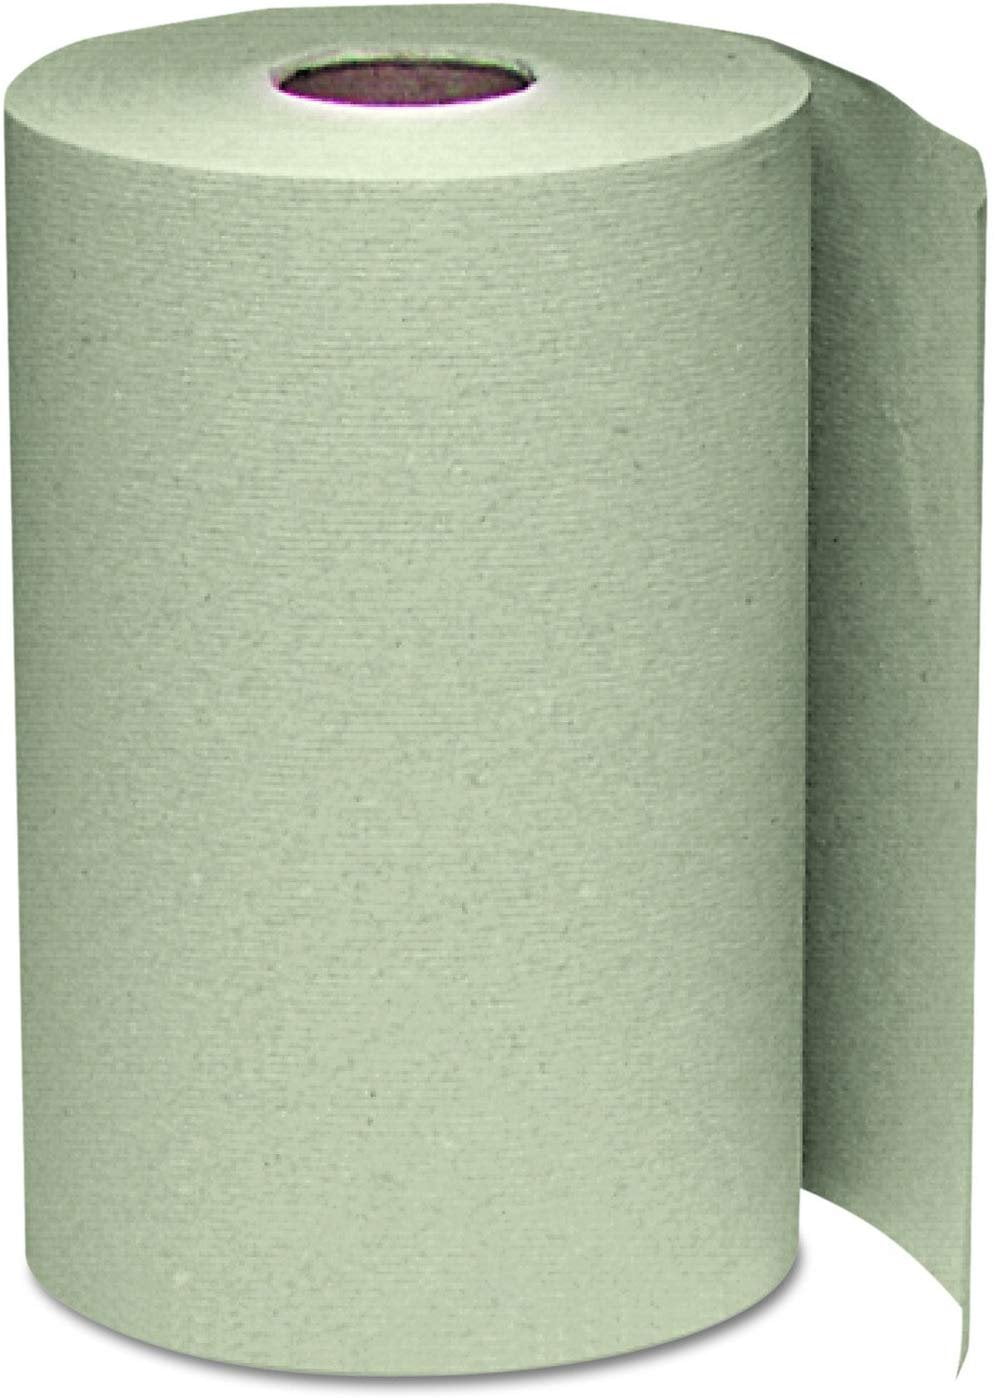 Marathon Paper Towel Brown 1-Ply 350 ft Rolls 12-count Non-perforated Recycled 